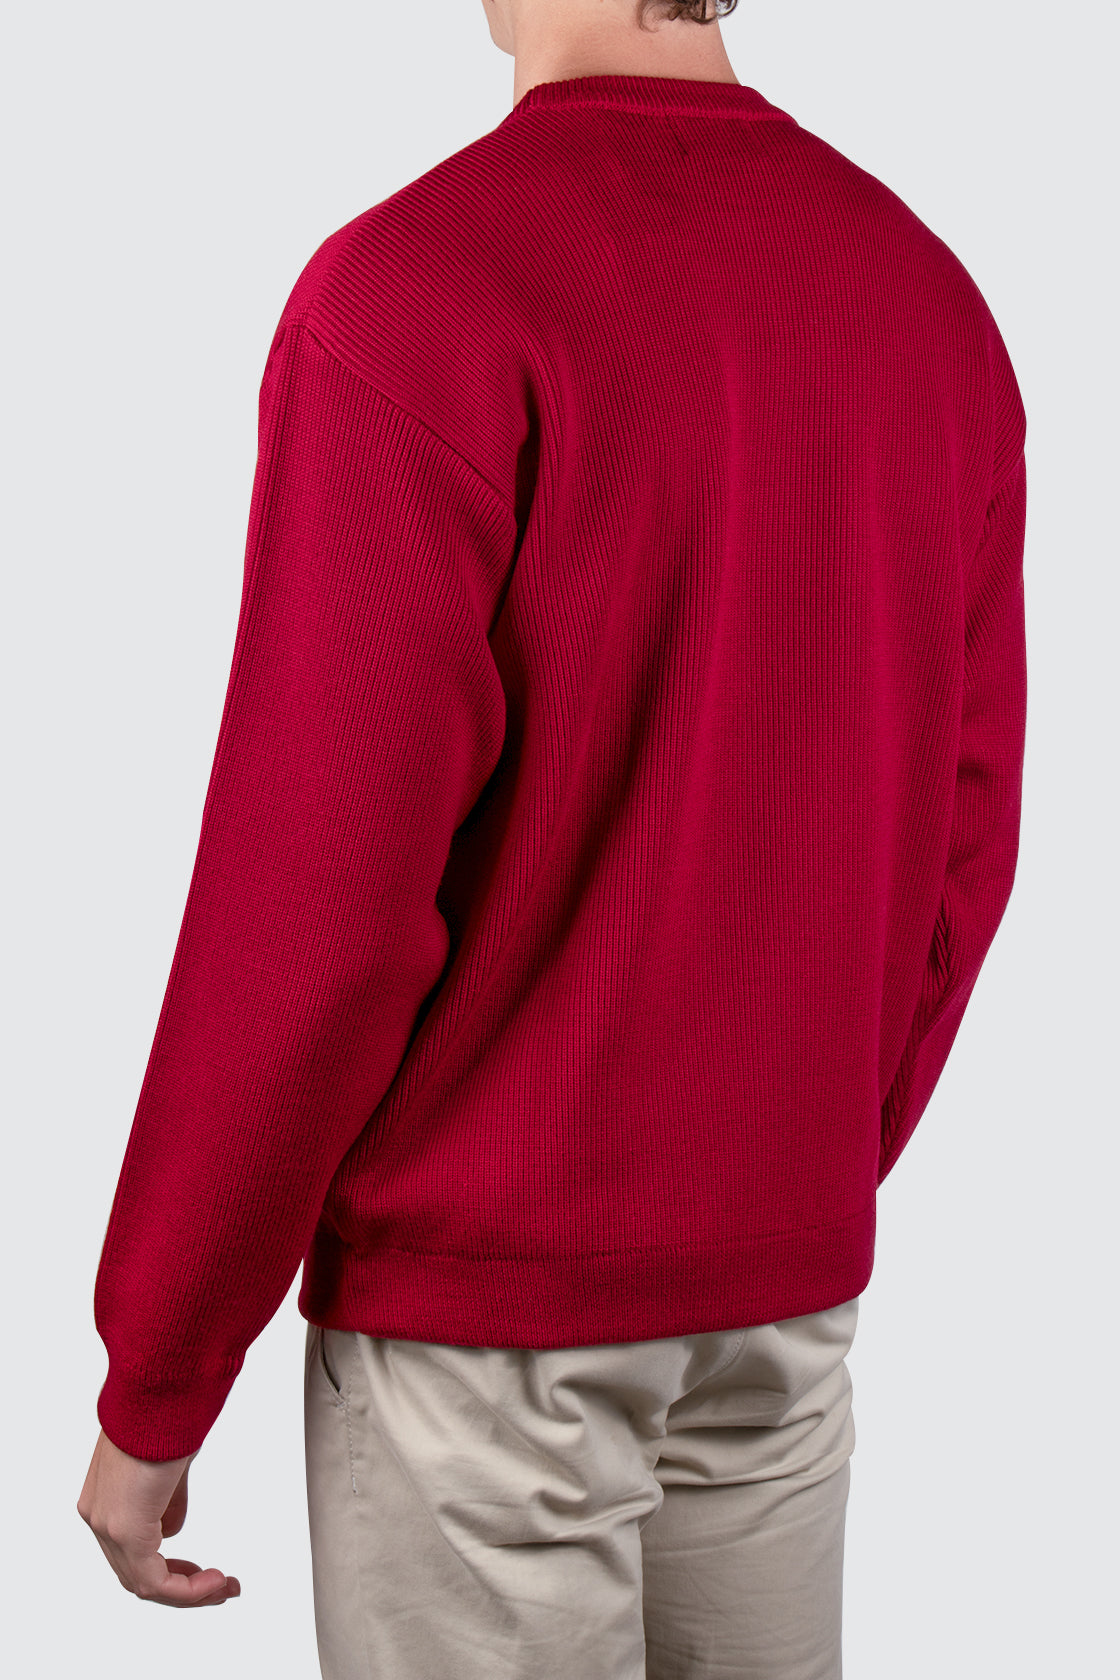 Routleys Fishermans Rib Crew Sweater Red